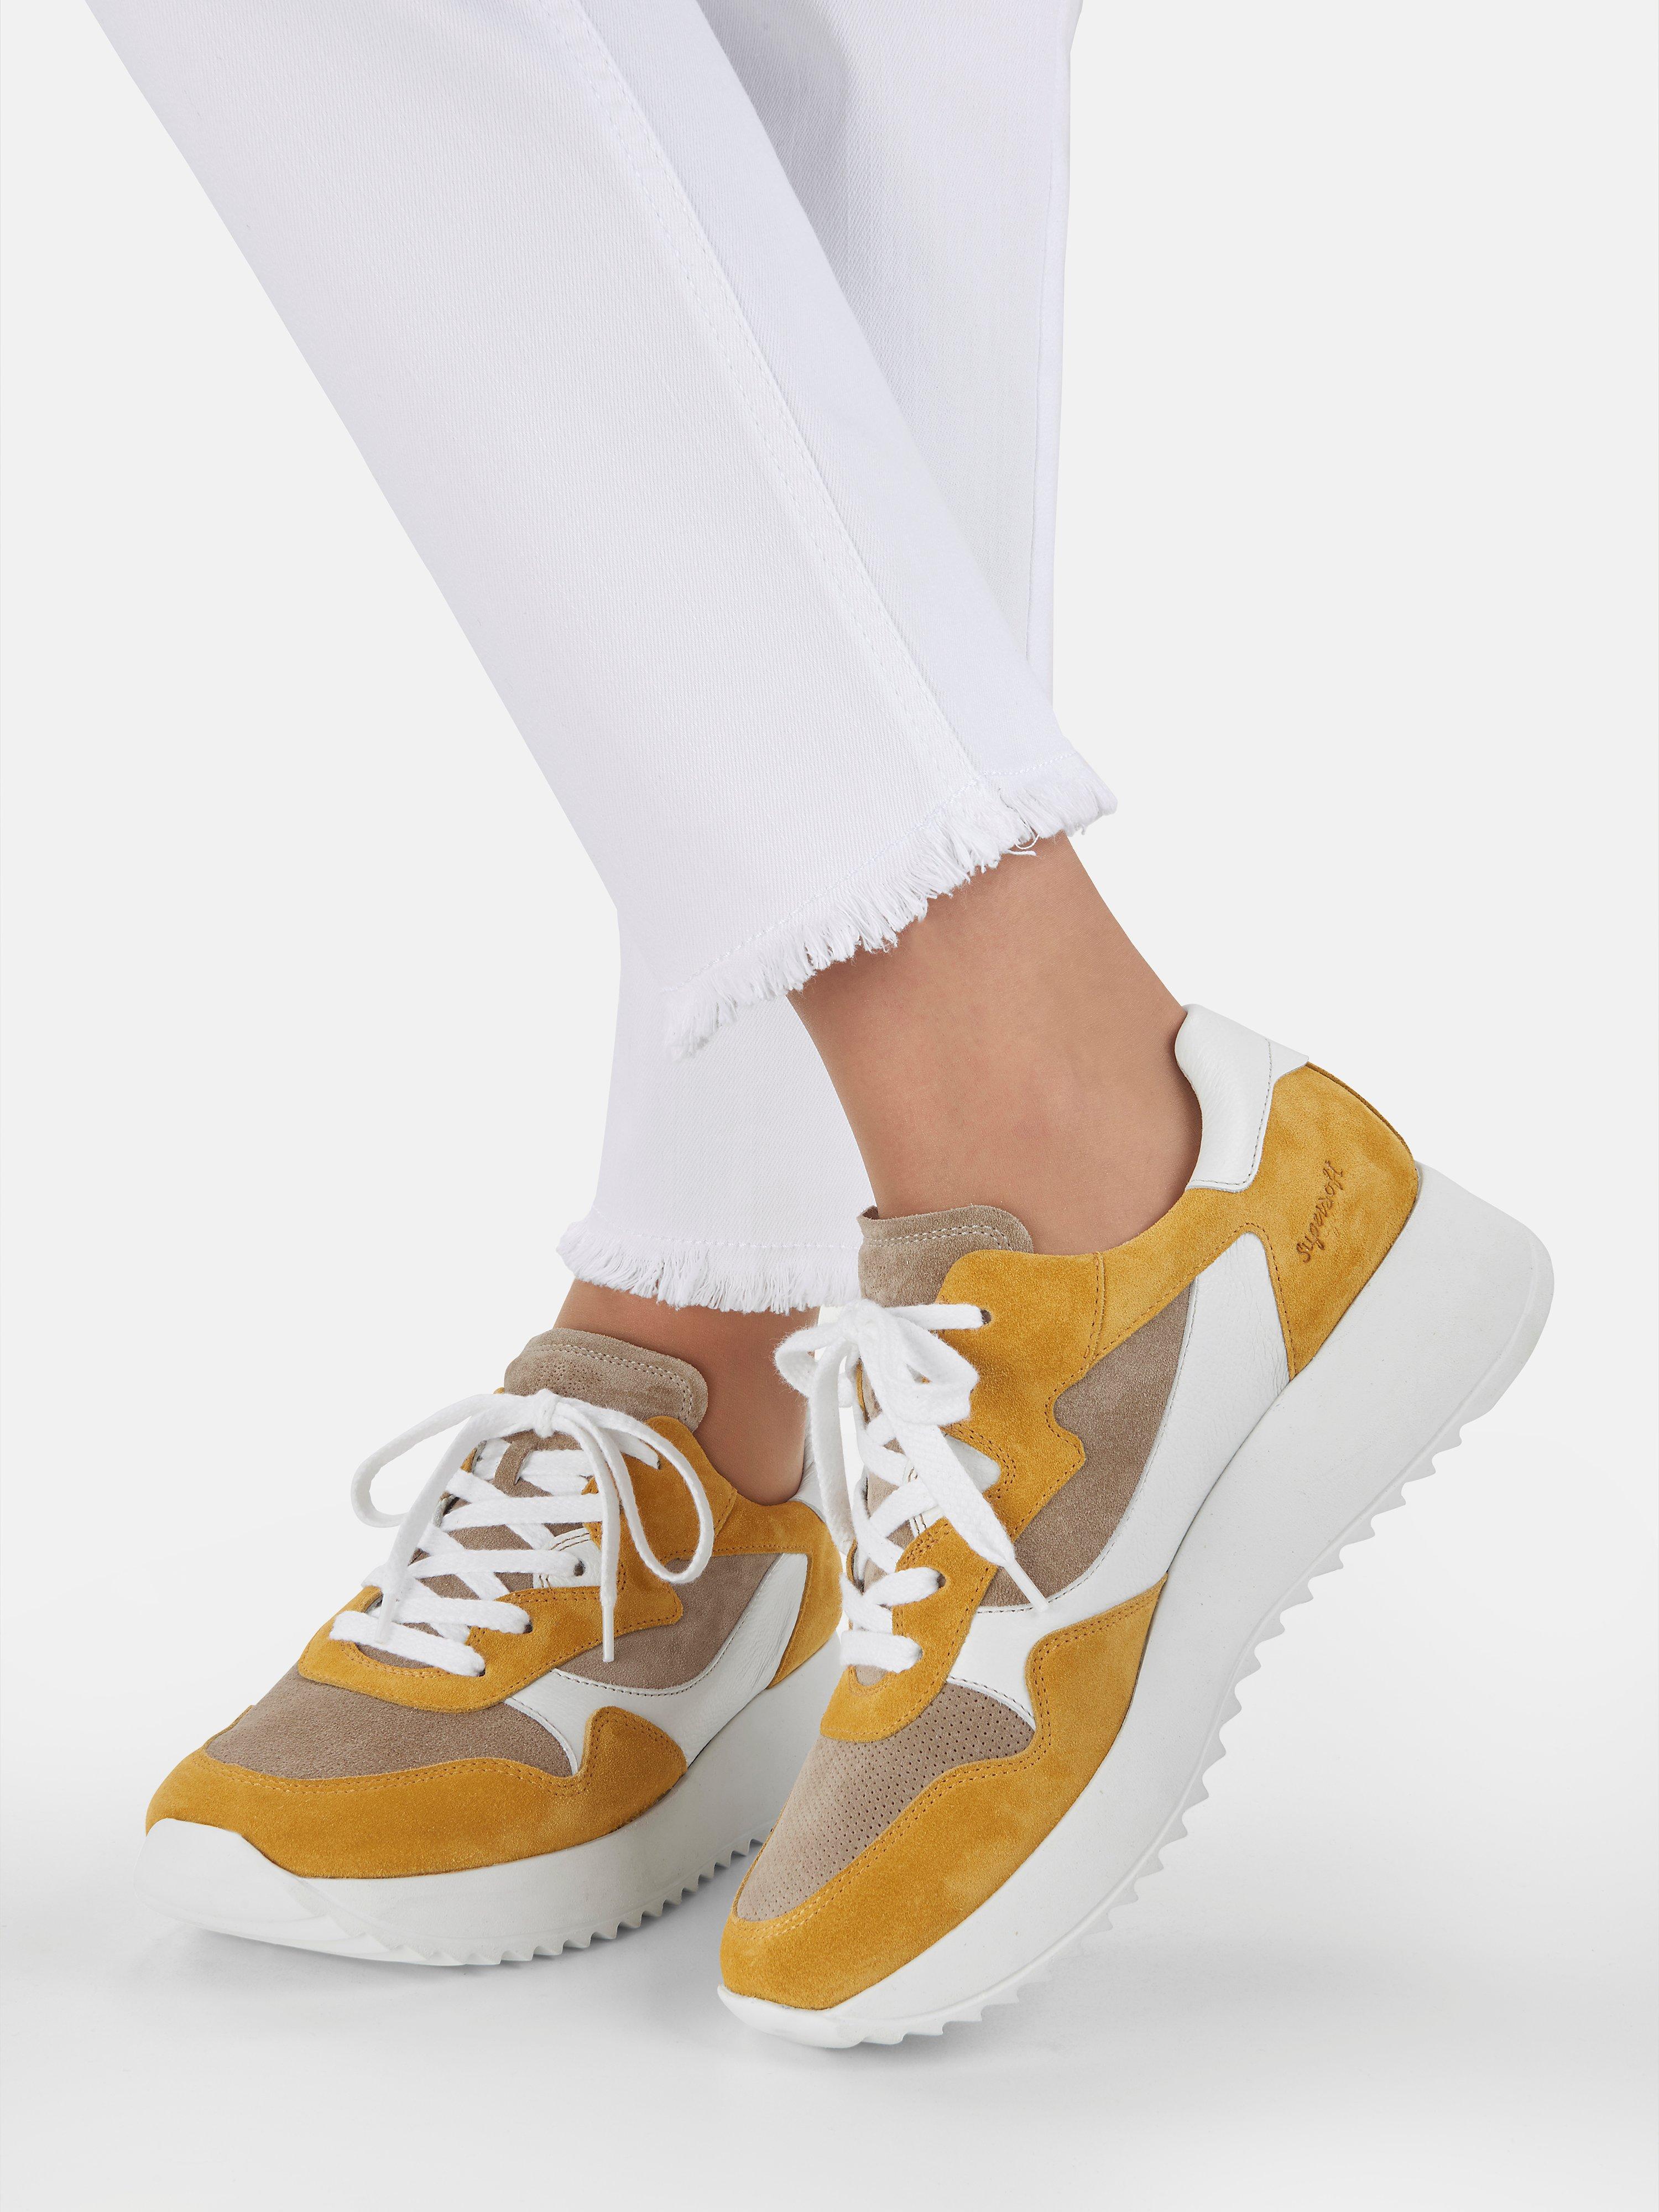 Paul Green - Kidskin suede and calf nappa leather sneakers - maize ...